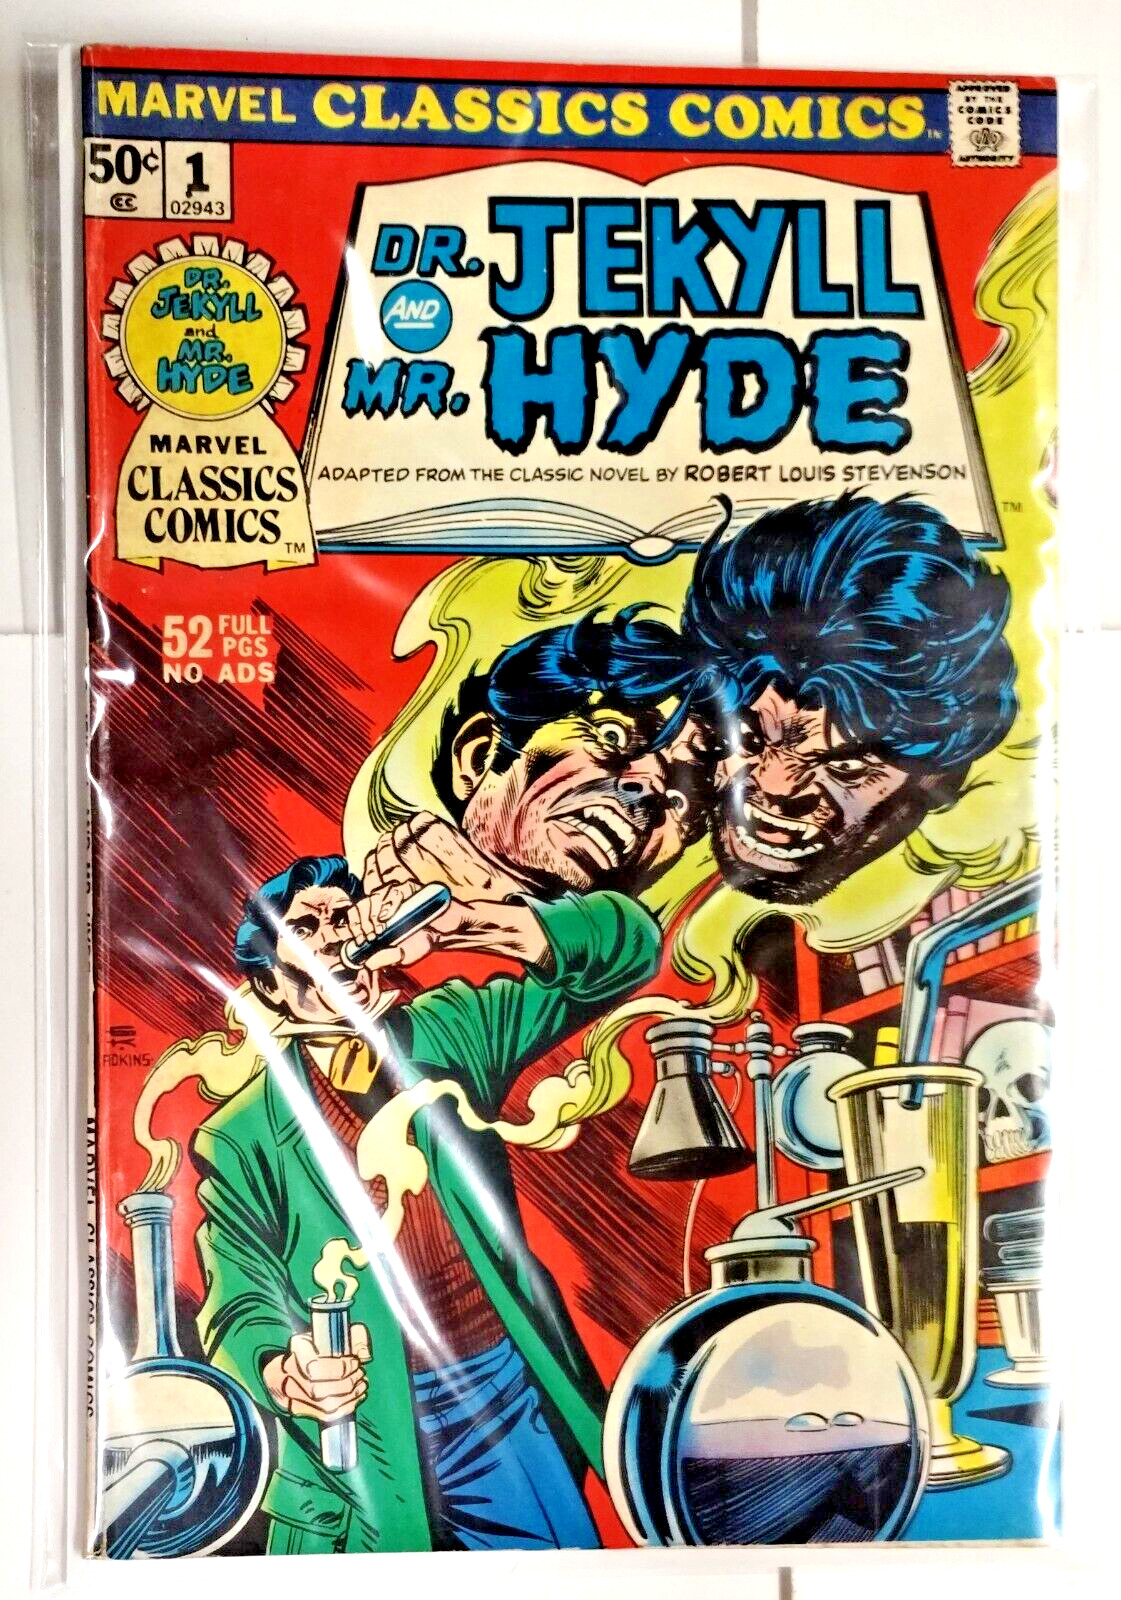 Marvel Classics #1 Dr. Jekyll and Mr. Hyde 1976 F/VF OW